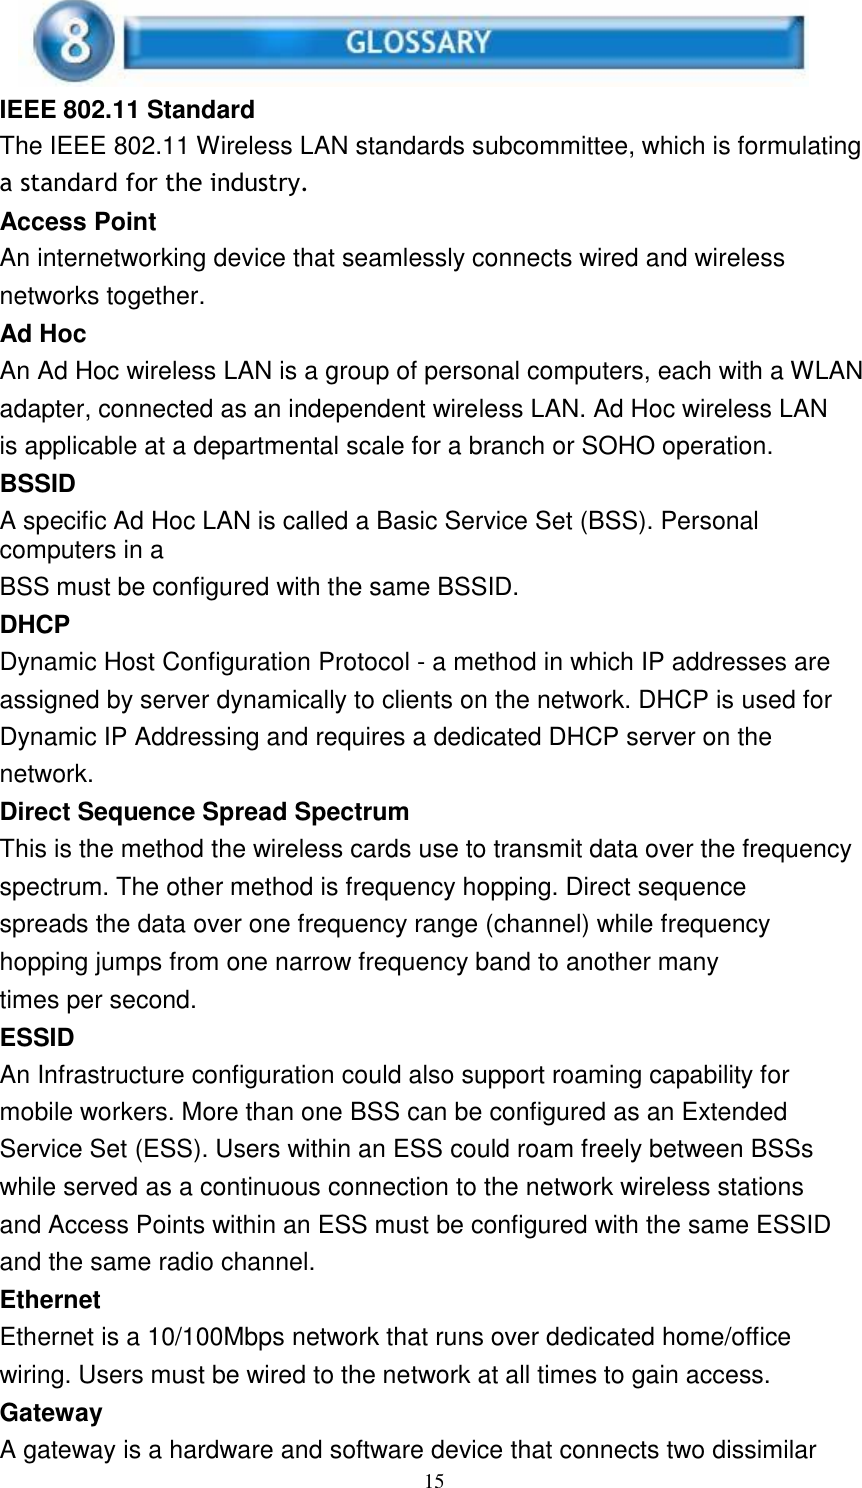 15      IEEE 802.11 Standard The IEEE 802.11 Wireless LAN standards subcommittee, which is formulating a standard for the industry. Access Point An internetworking device that seamlessly connects wired and wireless networks together. Ad Hoc An Ad Hoc wireless LAN is a group of personal computers, each with a WLAN adapter, connected as an independent wireless LAN. Ad Hoc wireless LAN is applicable at a departmental scale for a branch or SOHO operation. BSSID A specific Ad Hoc LAN is called a Basic Service Set (BSS). Personal computers in a BSS must be configured with the same BSSID. DHCP Dynamic Host Configuration Protocol - a method in which IP addresses are assigned by server dynamically to clients on the network. DHCP is used for Dynamic IP Addressing and requires a dedicated DHCP server on the network. Direct Sequence Spread Spectrum This is the method the wireless cards use to transmit data over the frequency spectrum. The other method is frequency hopping. Direct sequence spreads the data over one frequency range (channel) while frequency hopping jumps from one narrow frequency band to another many times per second. ESSID An Infrastructure configuration could also support roaming capability for mobile workers. More than one BSS can be configured as an Extended Service Set (ESS). Users within an ESS could roam freely between BSSs while served as a continuous connection to the network wireless stations and Access Points within an ESS must be configured with the same ESSID and the same radio channel. Ethernet Ethernet is a 10/100Mbps network that runs over dedicated home/office wiring. Users must be wired to the network at all times to gain access. Gateway A gateway is a hardware and software device that connects two dissimilar 